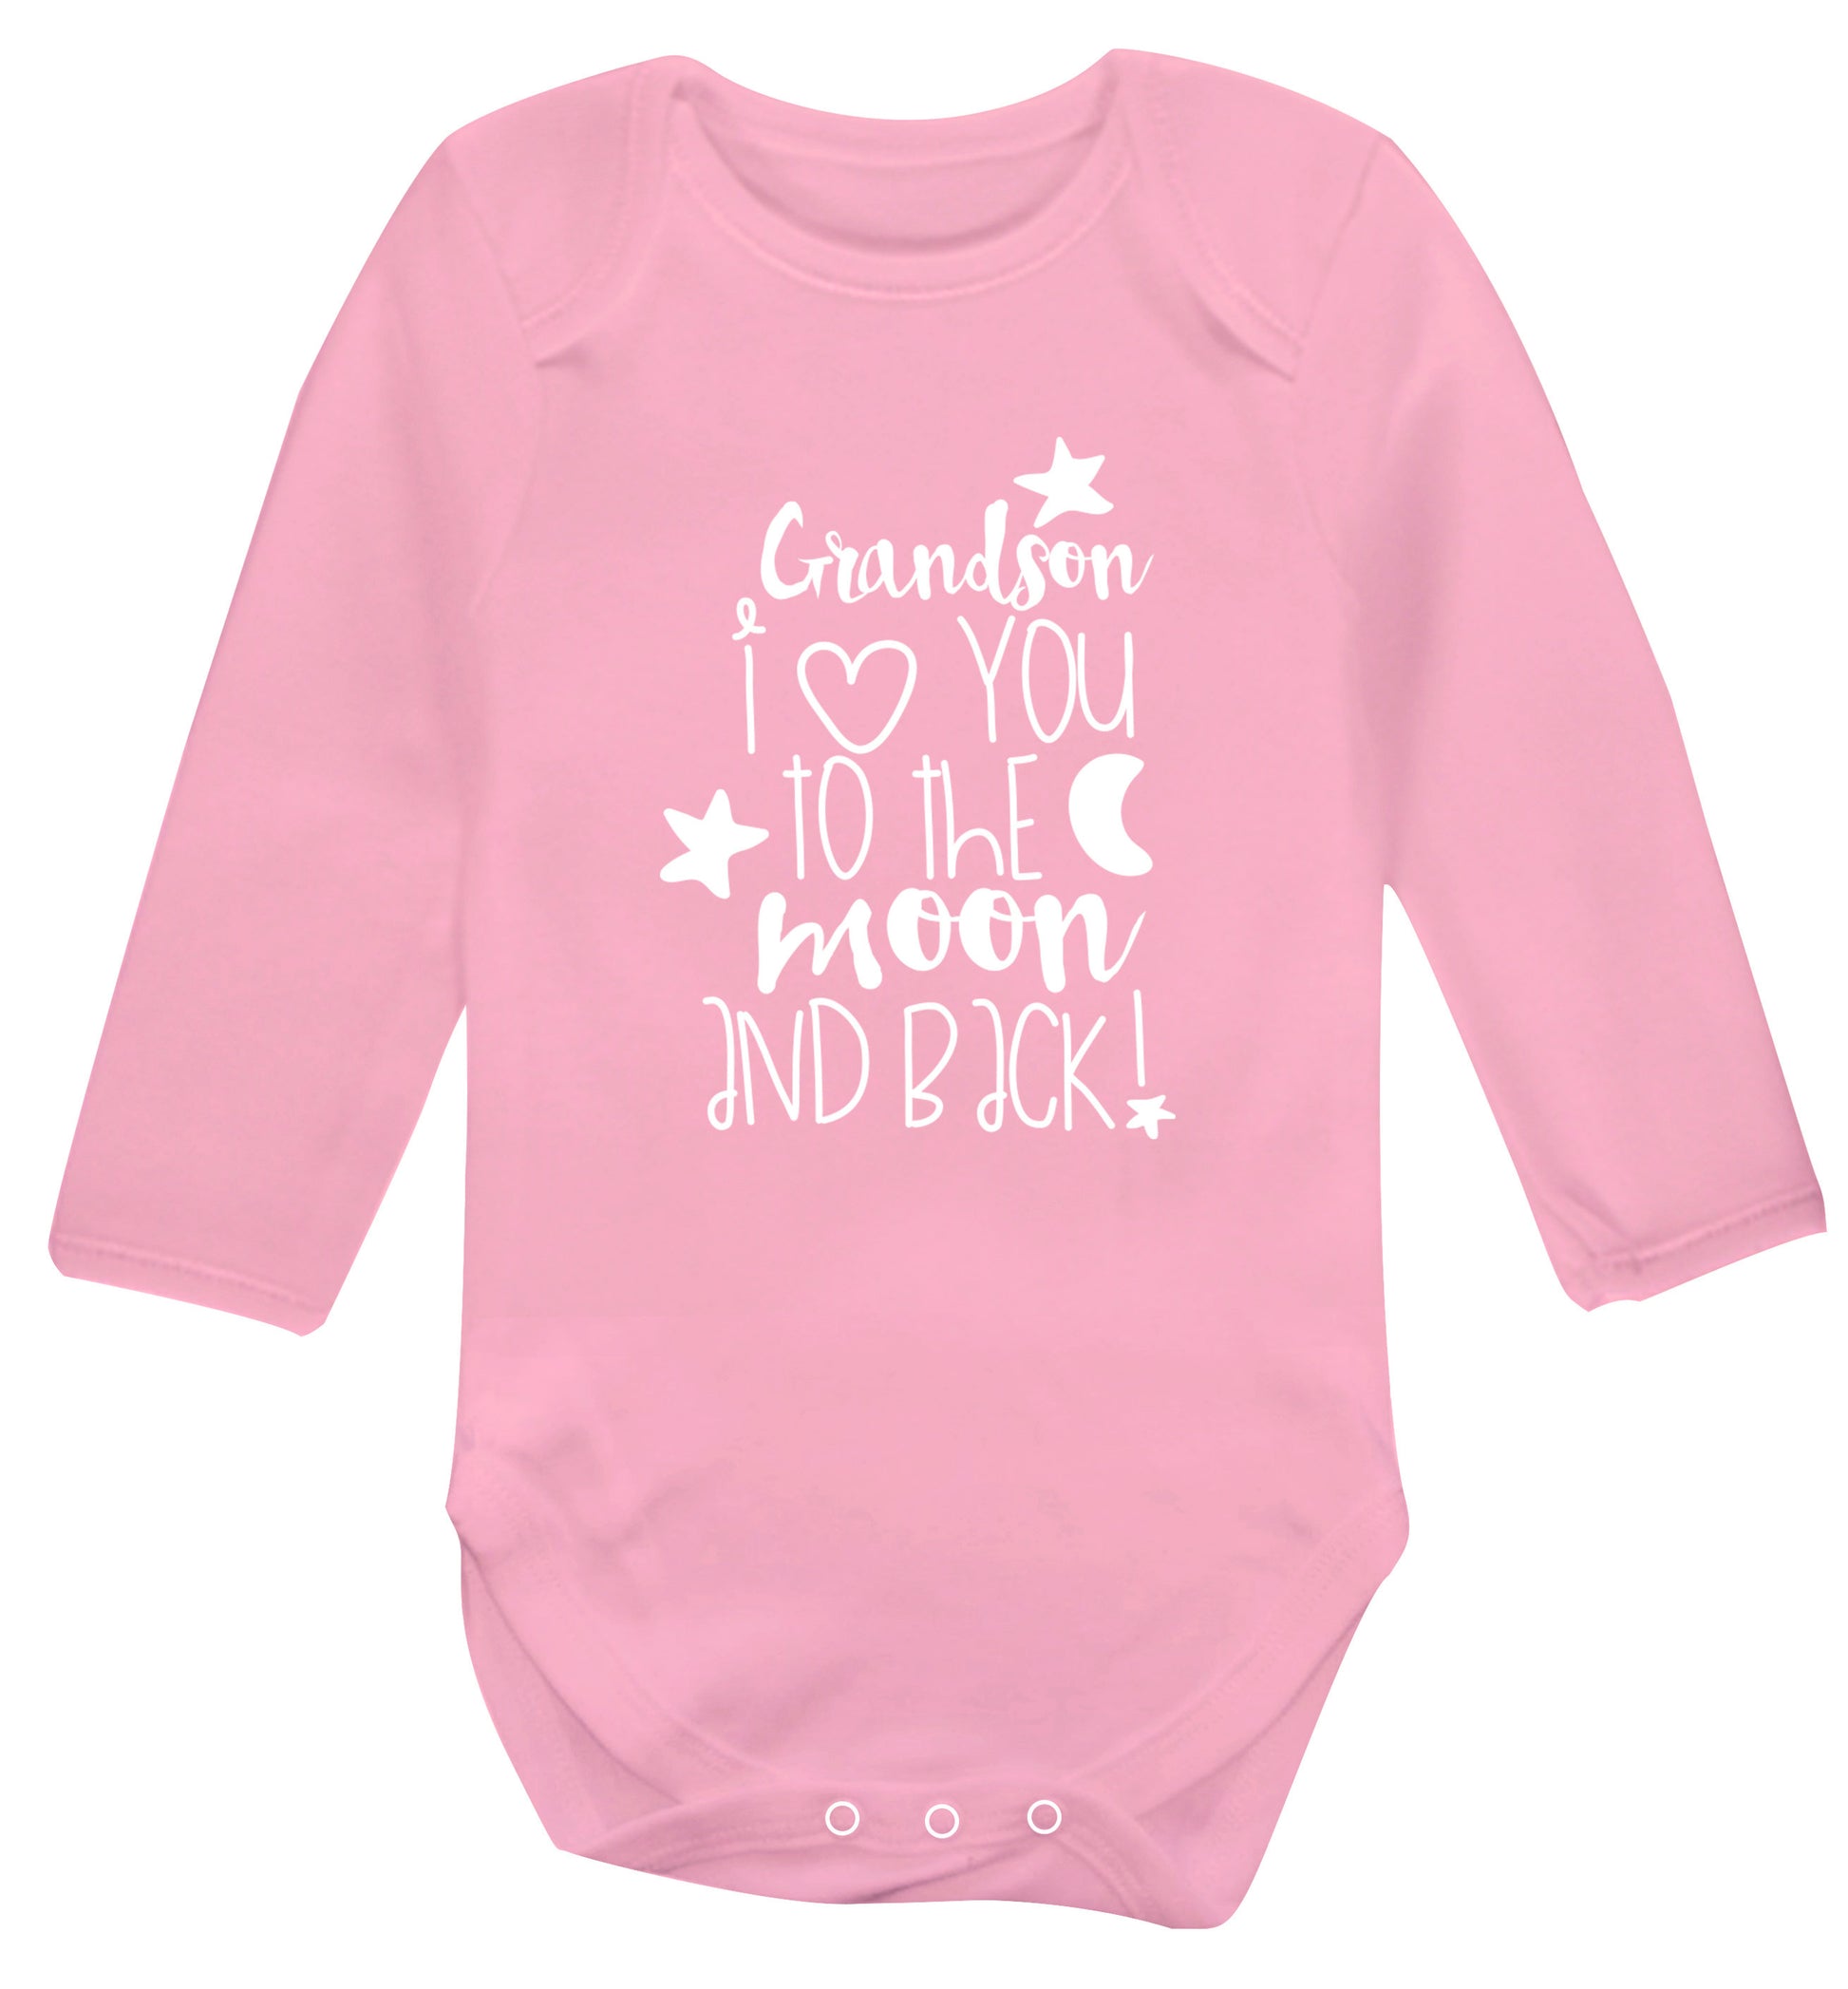 Grandson I love you to the moon and back Baby Vest long sleeved pale pink 6-12 months